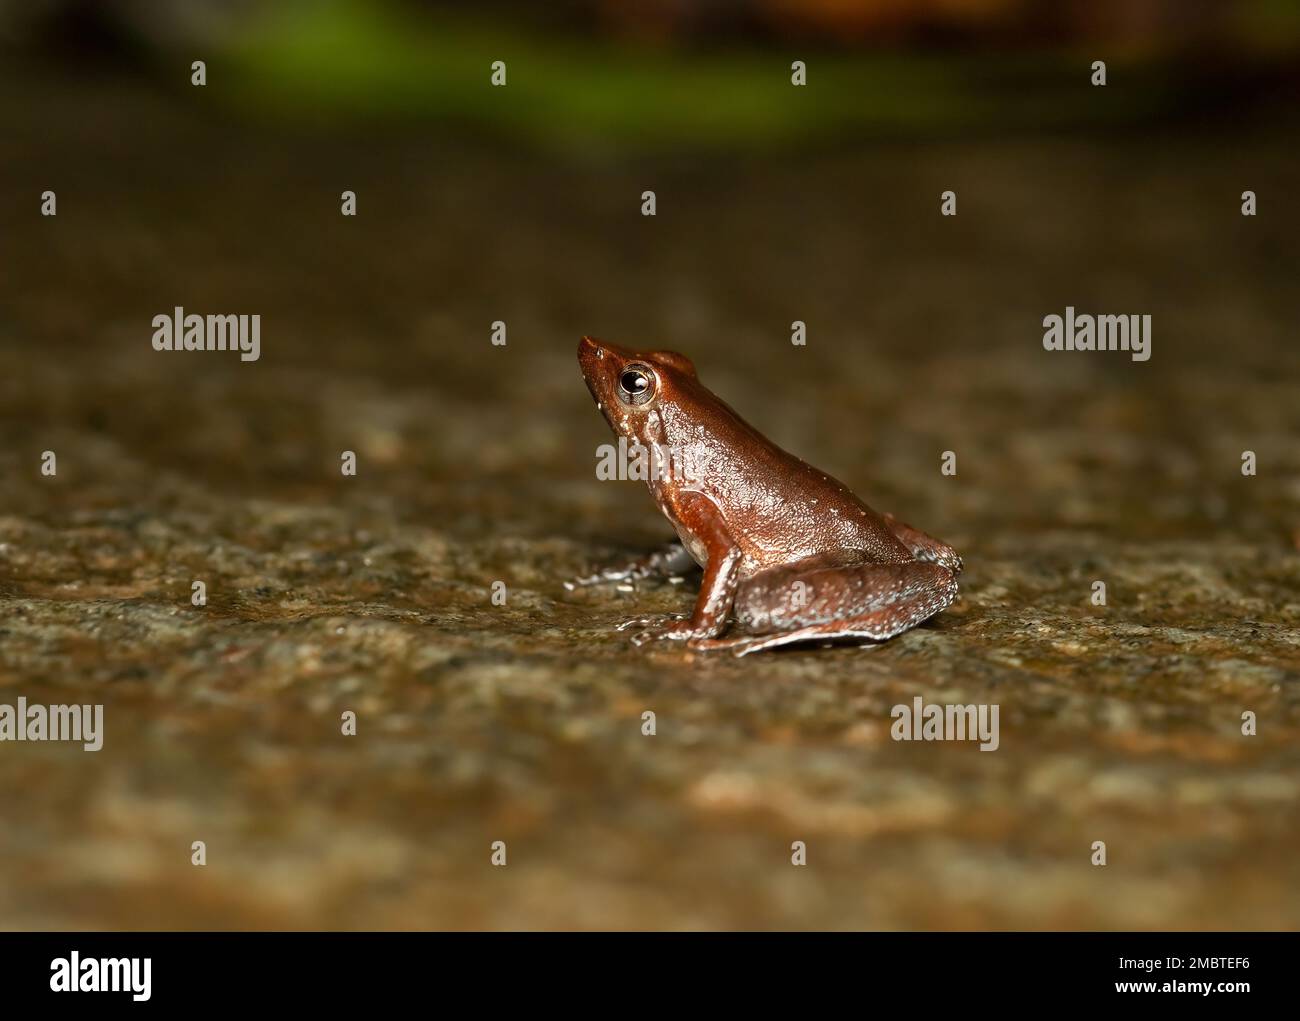 A dancing frog resting on a rocky surface inside Agumbe rain forest on a rainy day Stock Photo